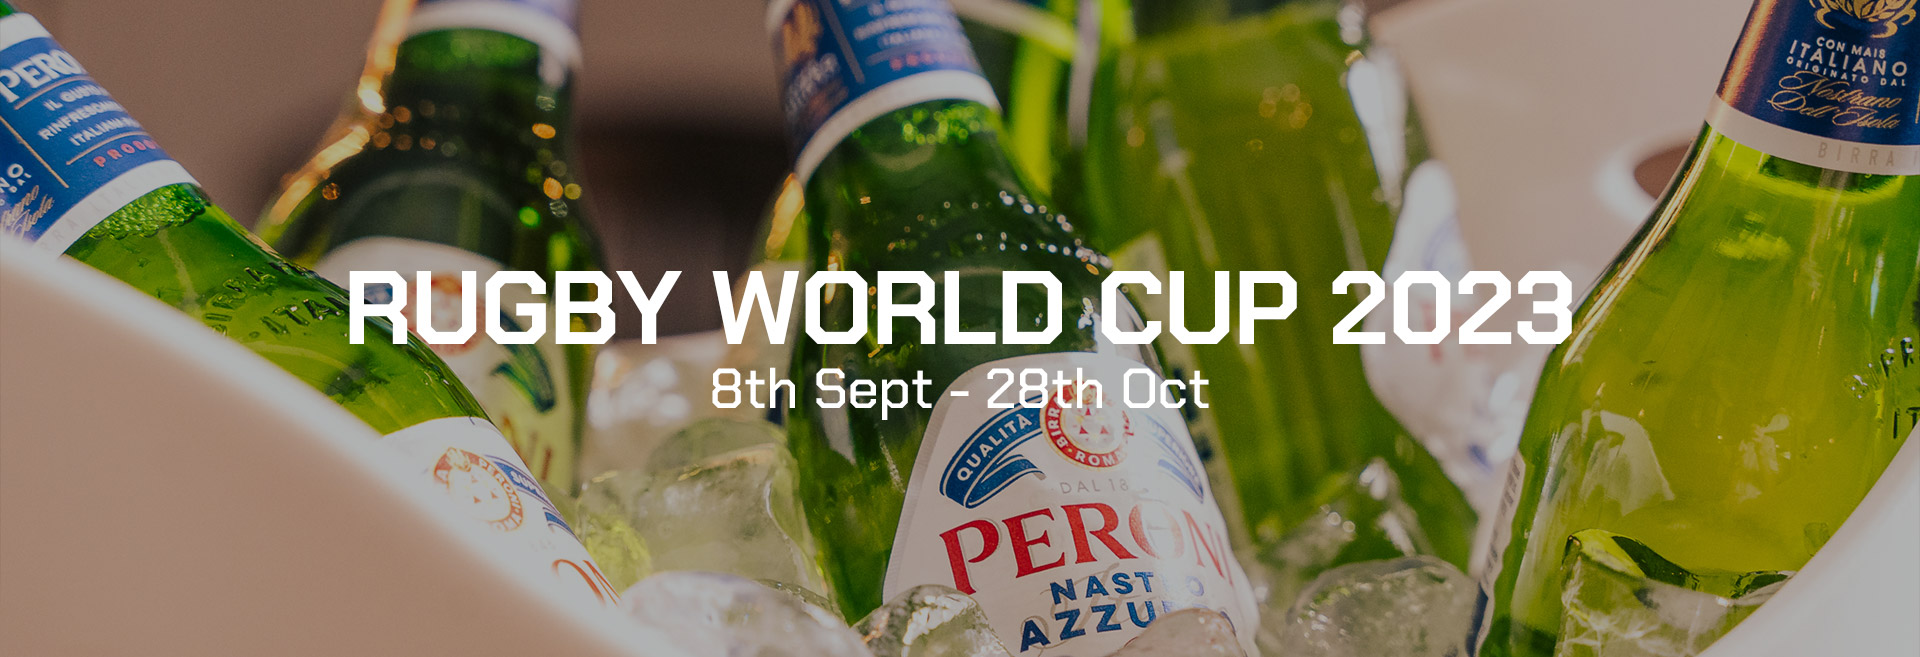 Watch the Rugby World Cup at The Flyer